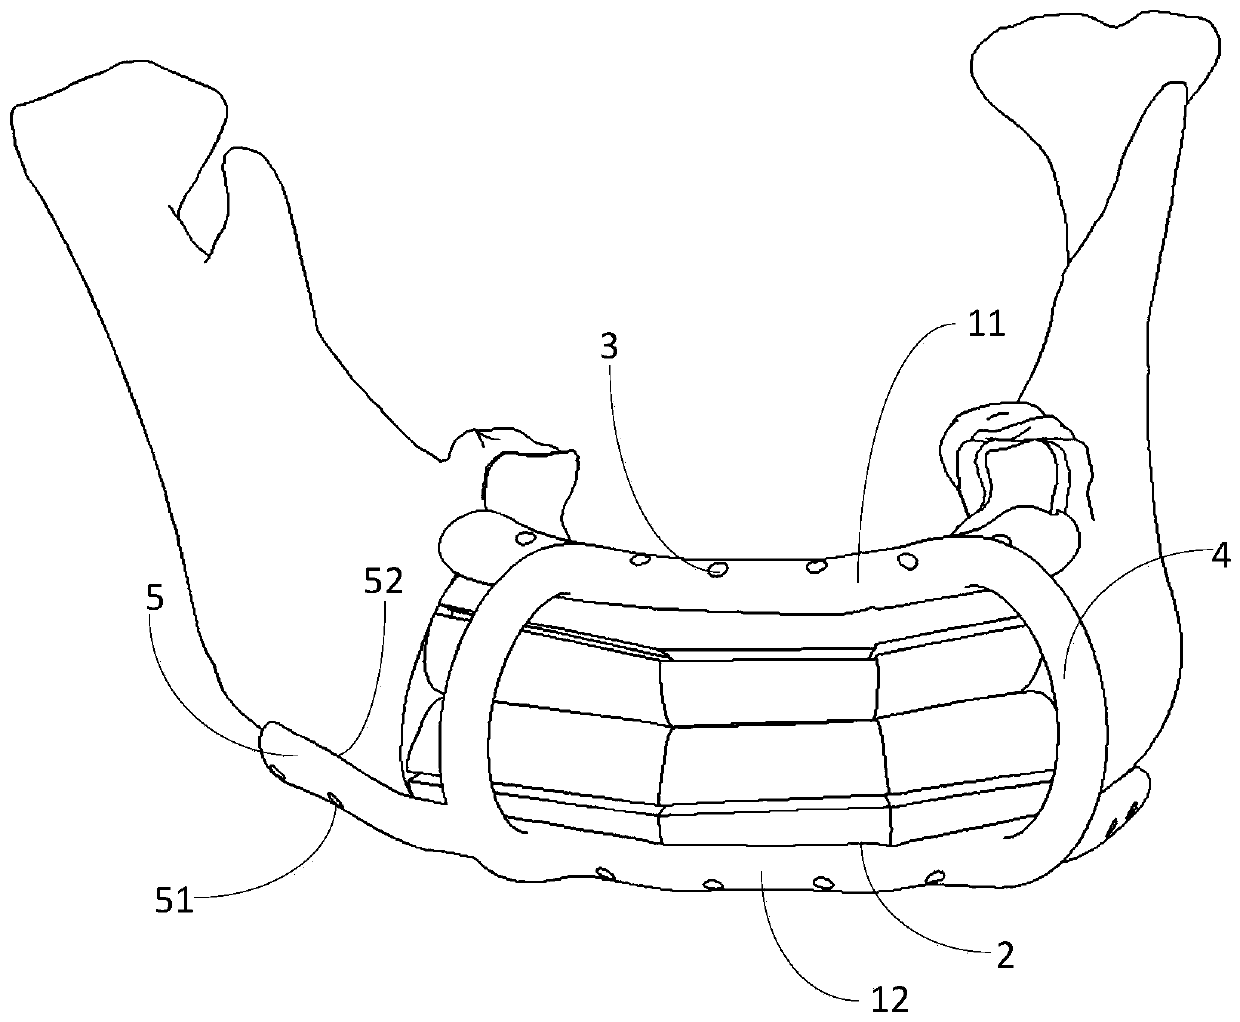 In-position guide plate applied to multi-segment fibula double-stack reconstruction of mandible